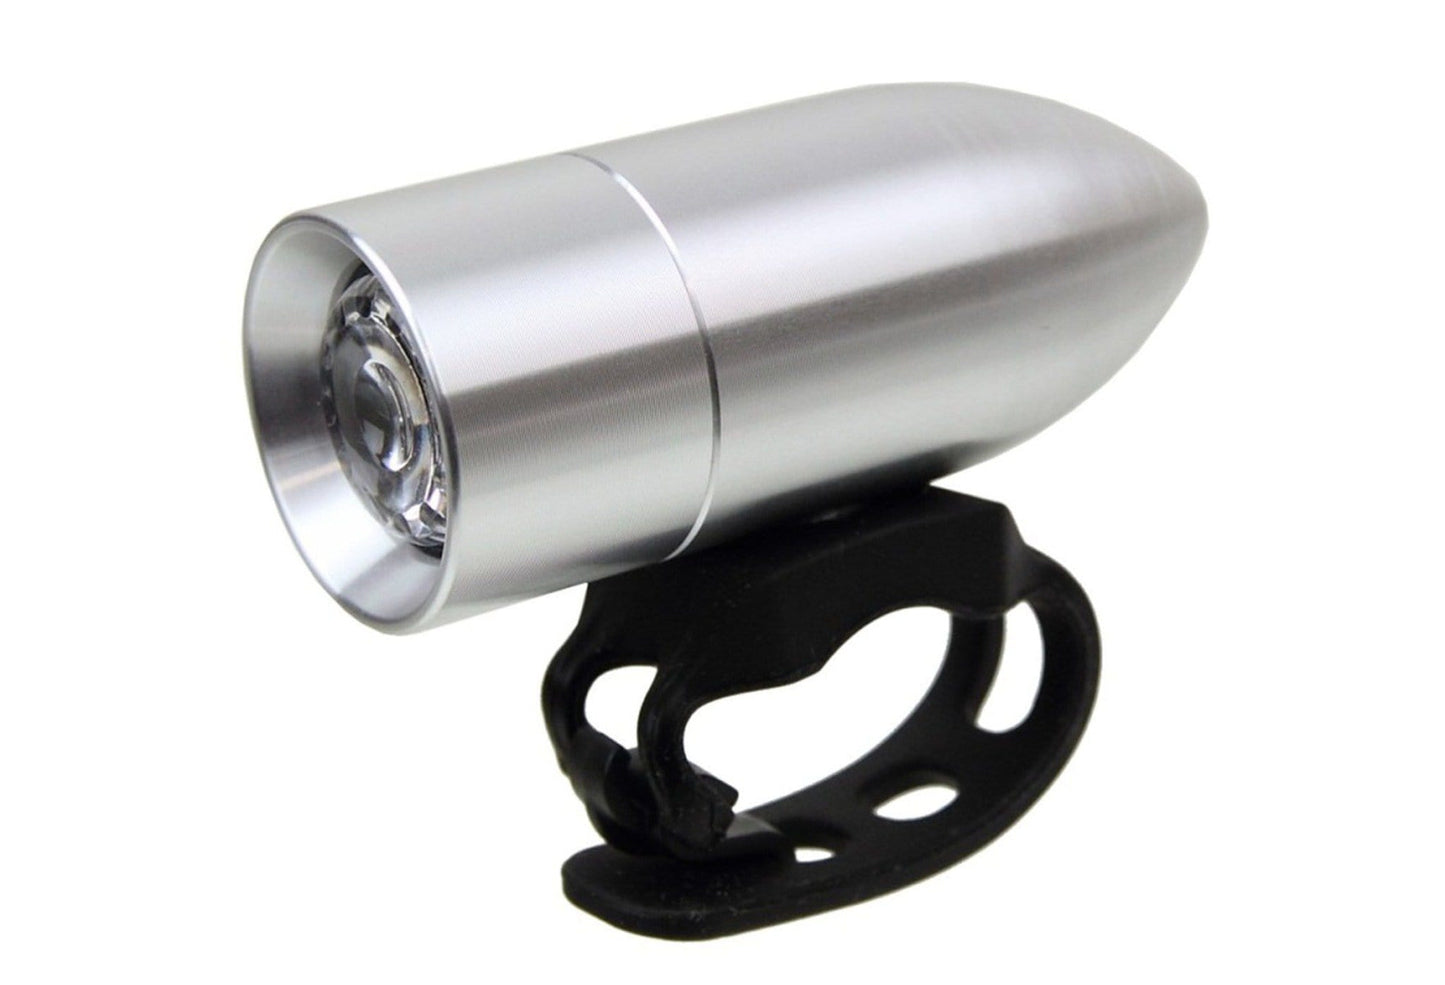 Rindow bullet light Silver with rubber strap mount attached